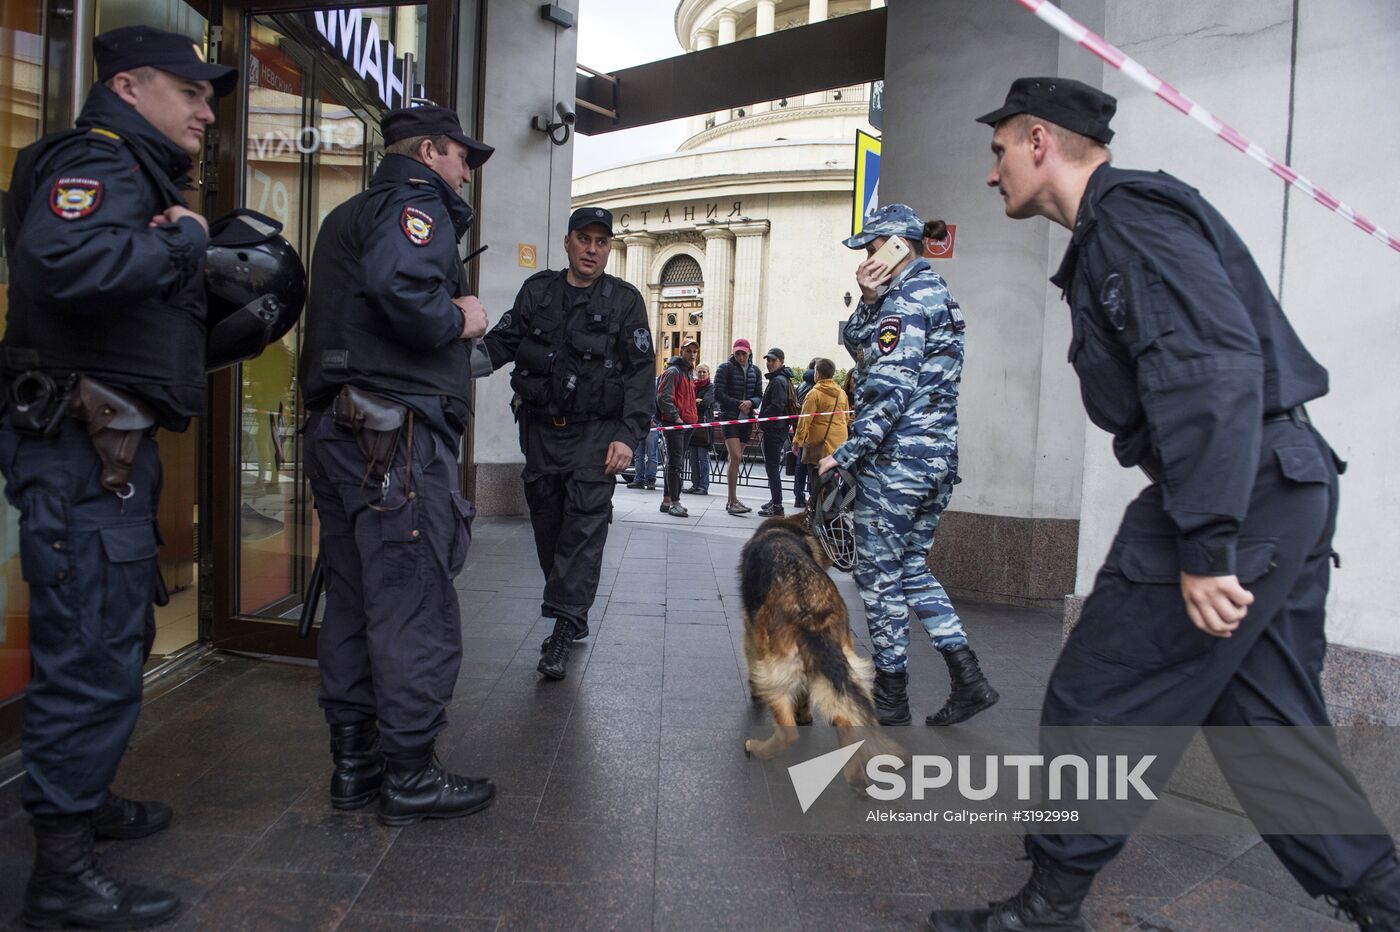 Bomb threat is checked in St. Petersburg